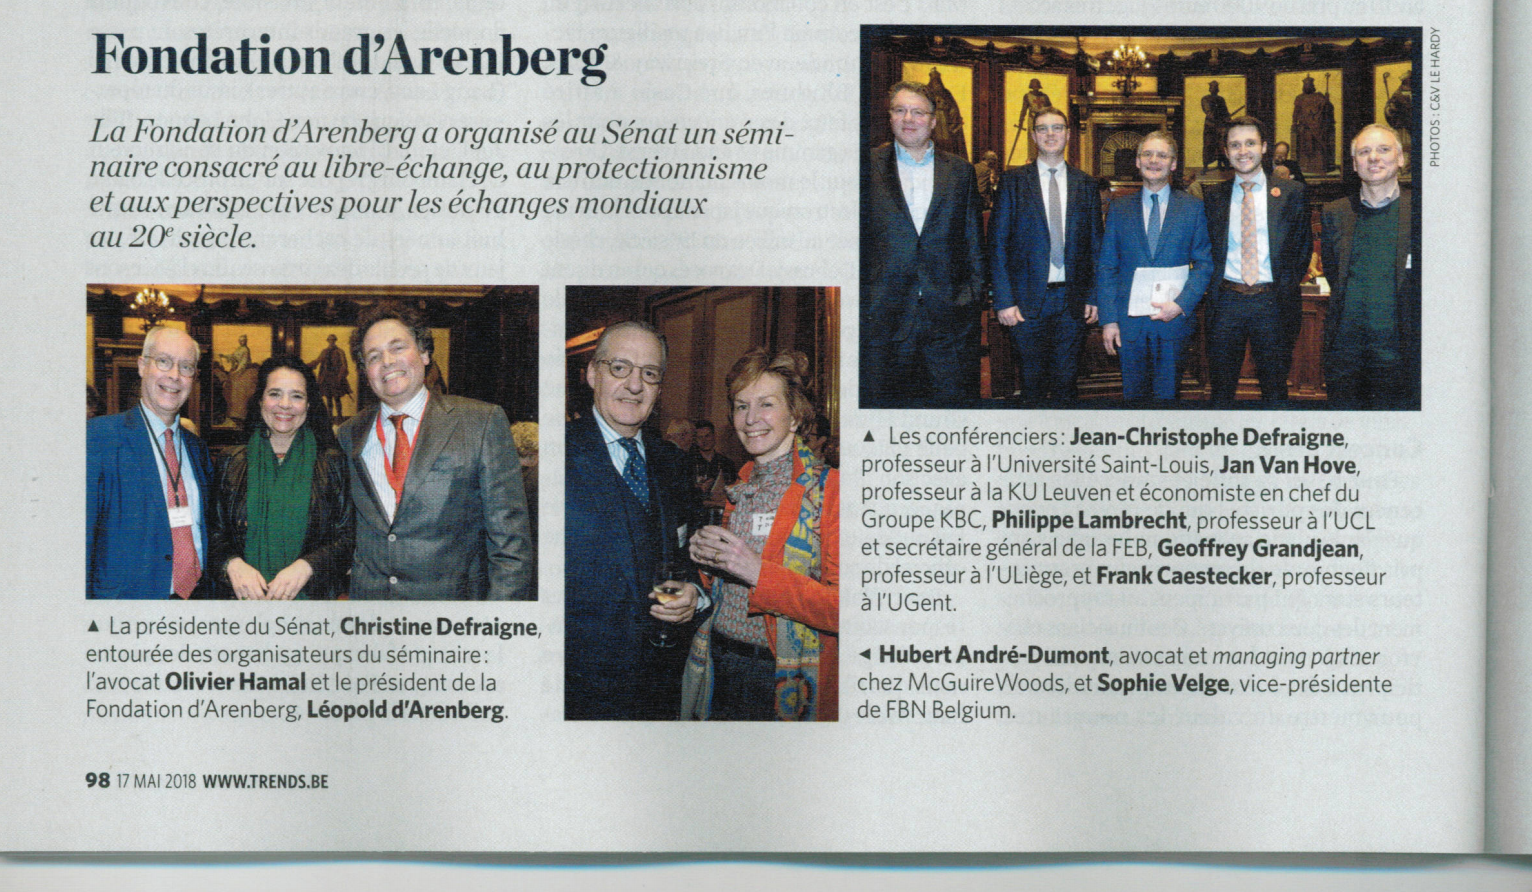 Article in Trends on the seminar in the Belgian senate